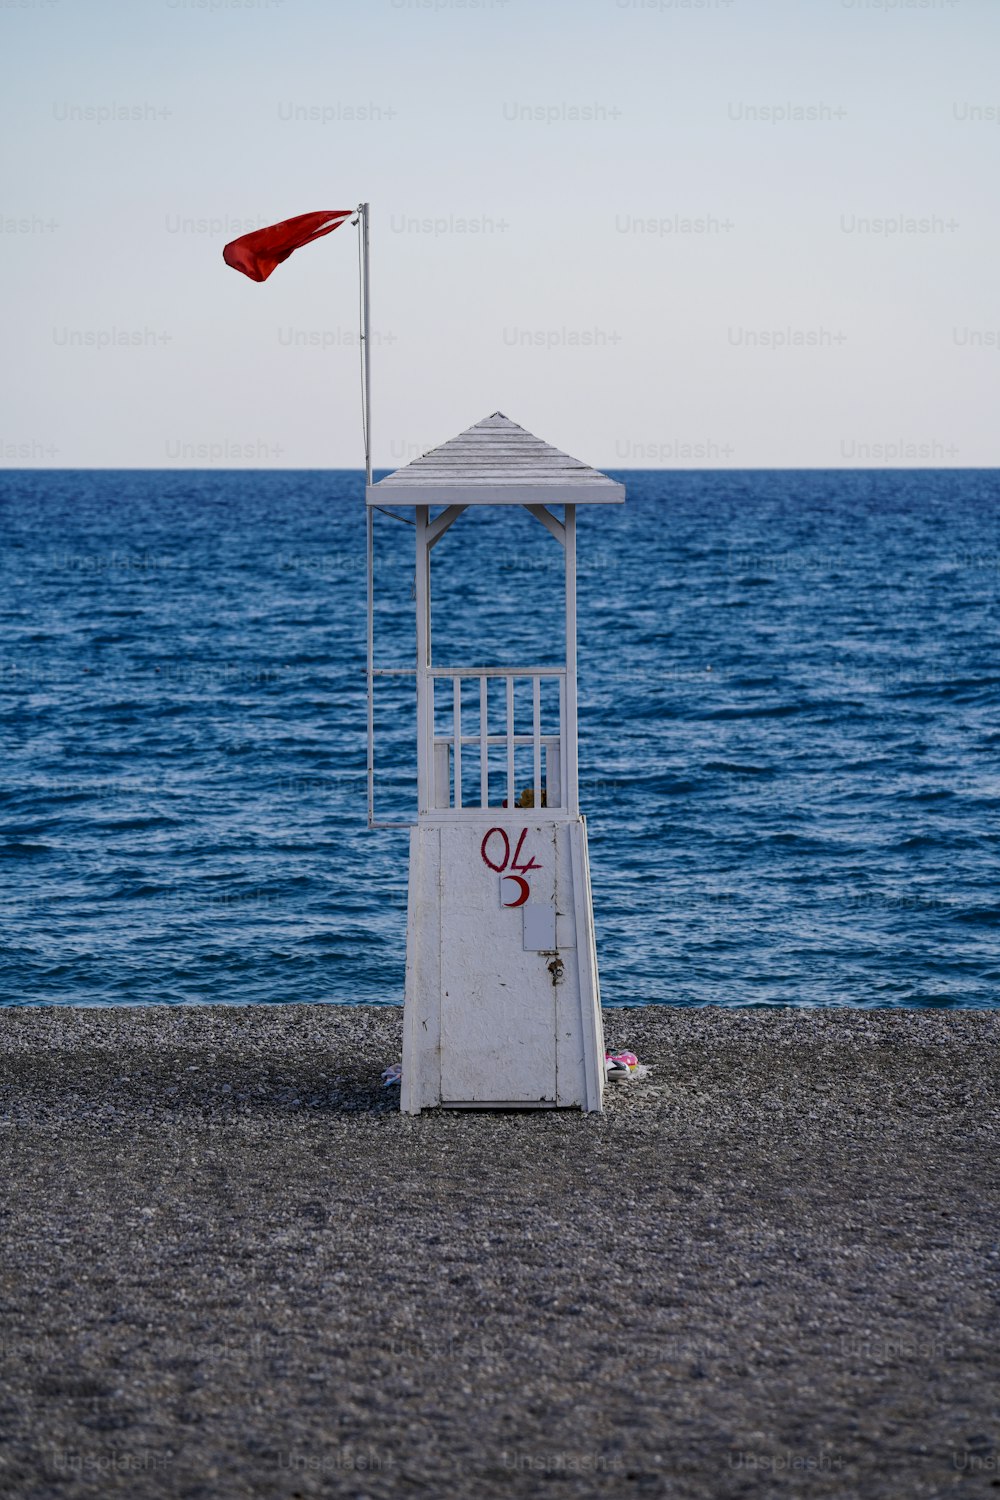 a lifeguard tower sitting on the beach next to the ocean